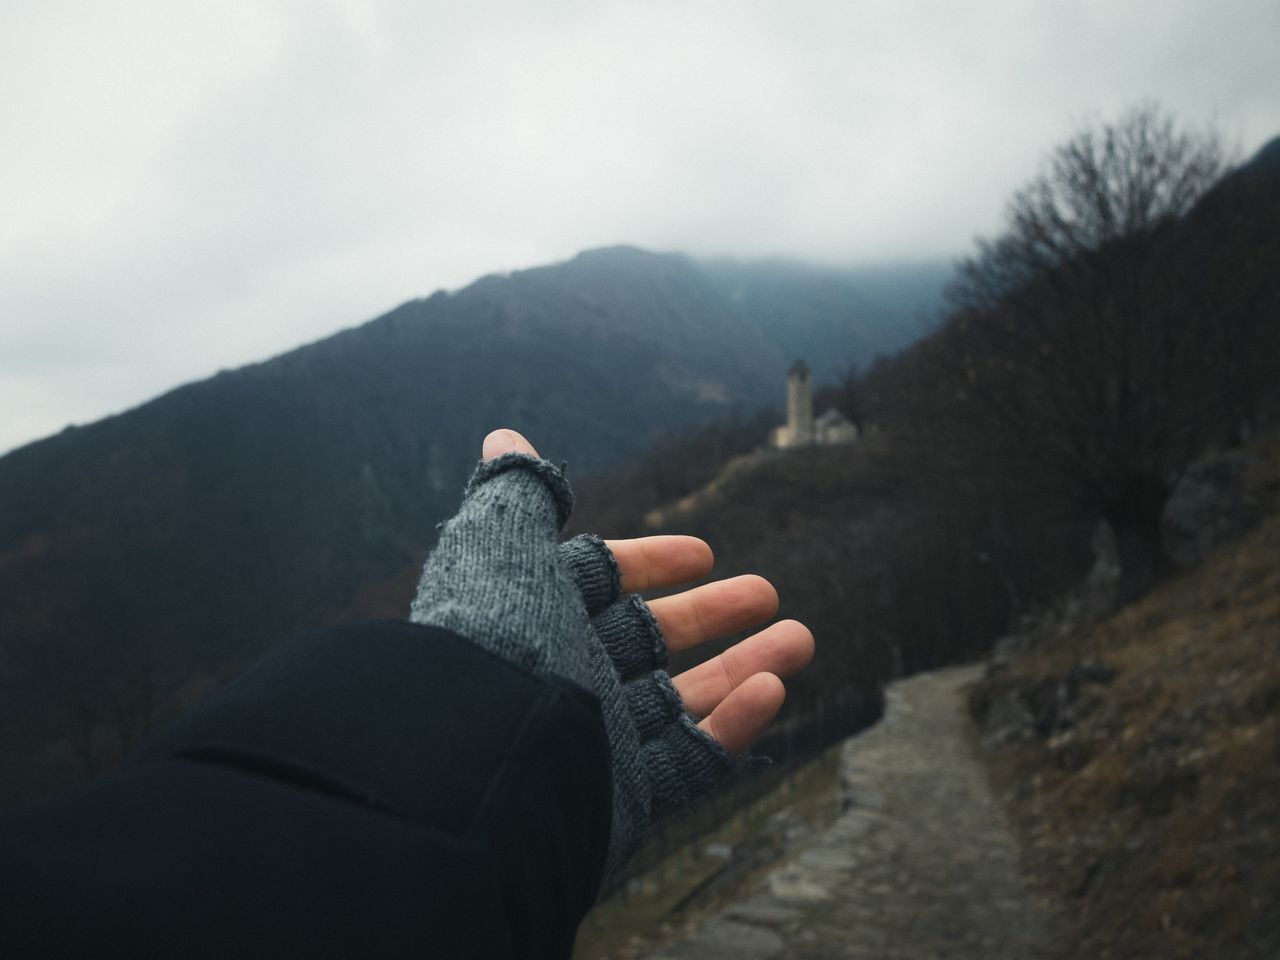 Cropped hand of person reaching mountains against sky during foggy weather